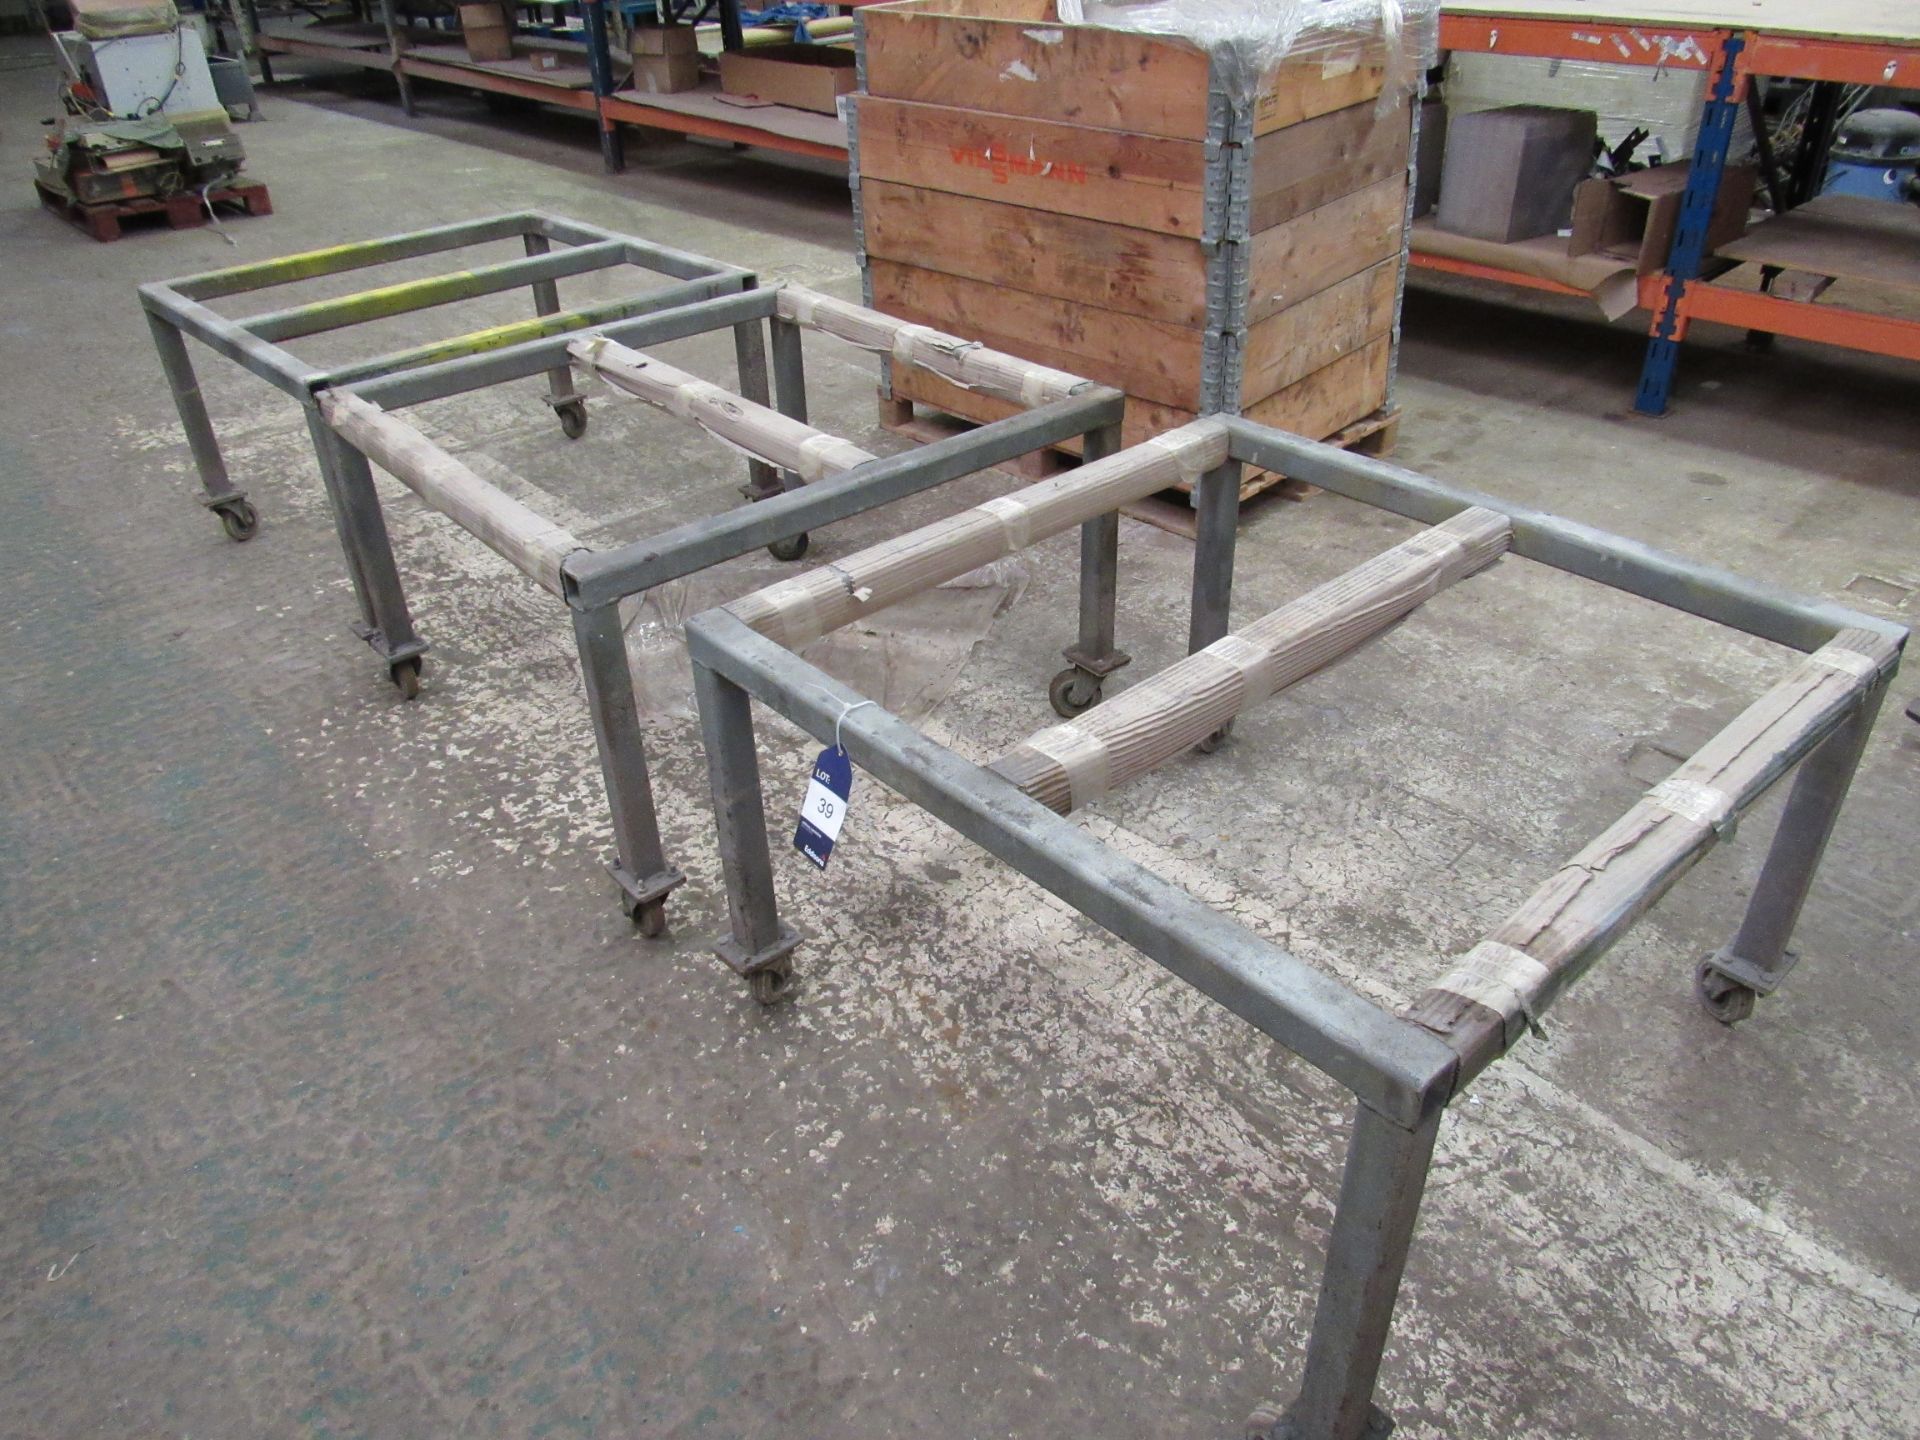 3 Mobile Steel Stands - Located on the first floor. The only removal access for large items is via